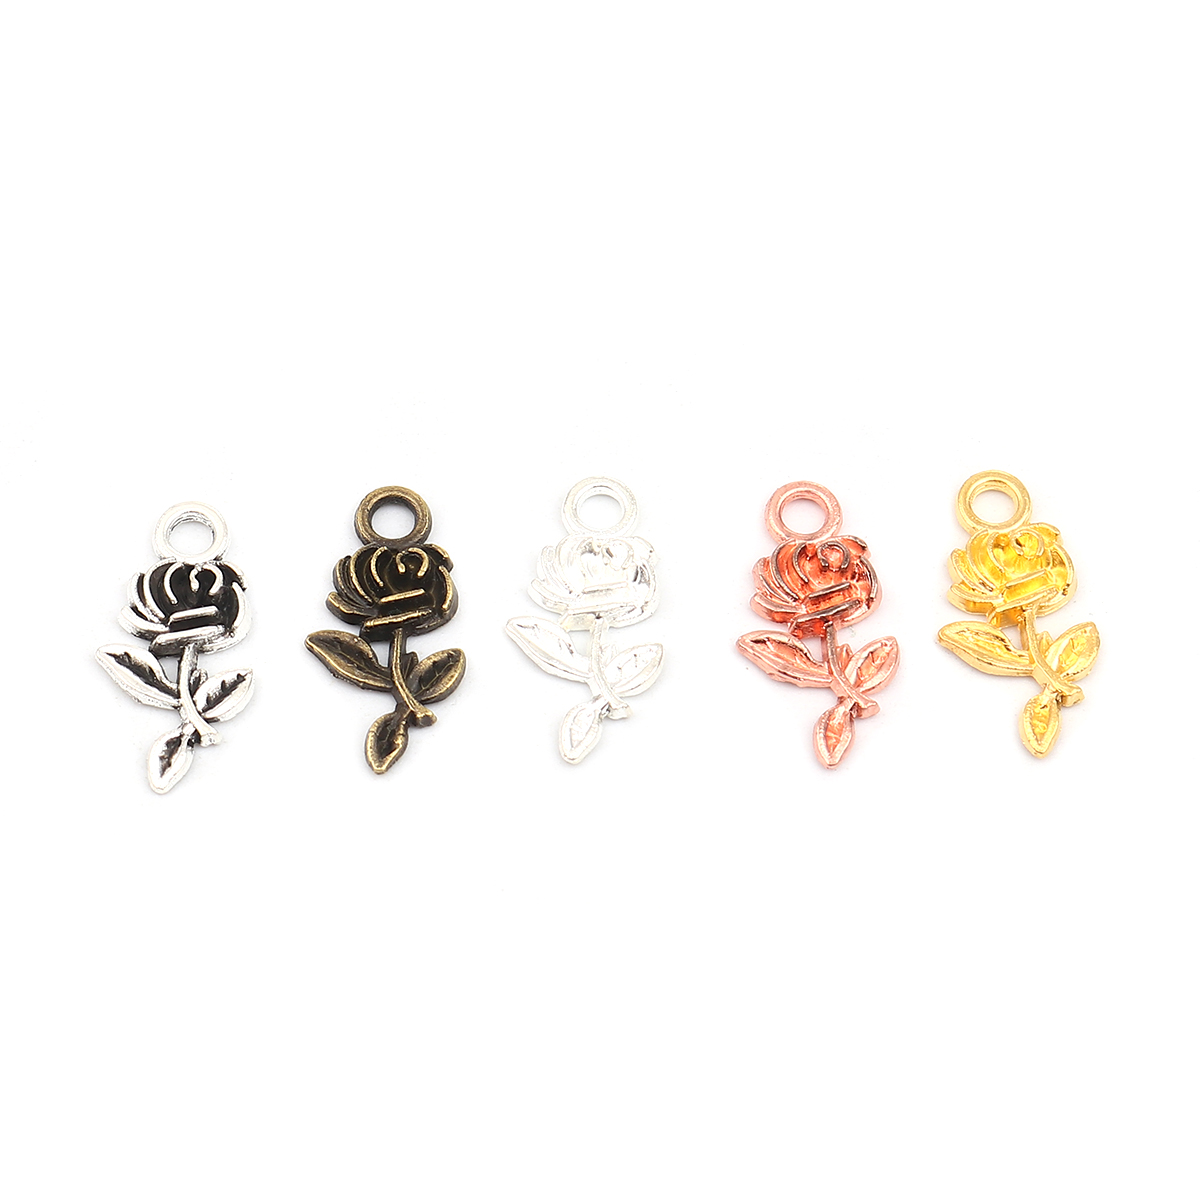 Picture of Zinc Based Alloy Valentine's Day Charms Rose Flower Gold Plated 21mm x 10mm, 50 PCs